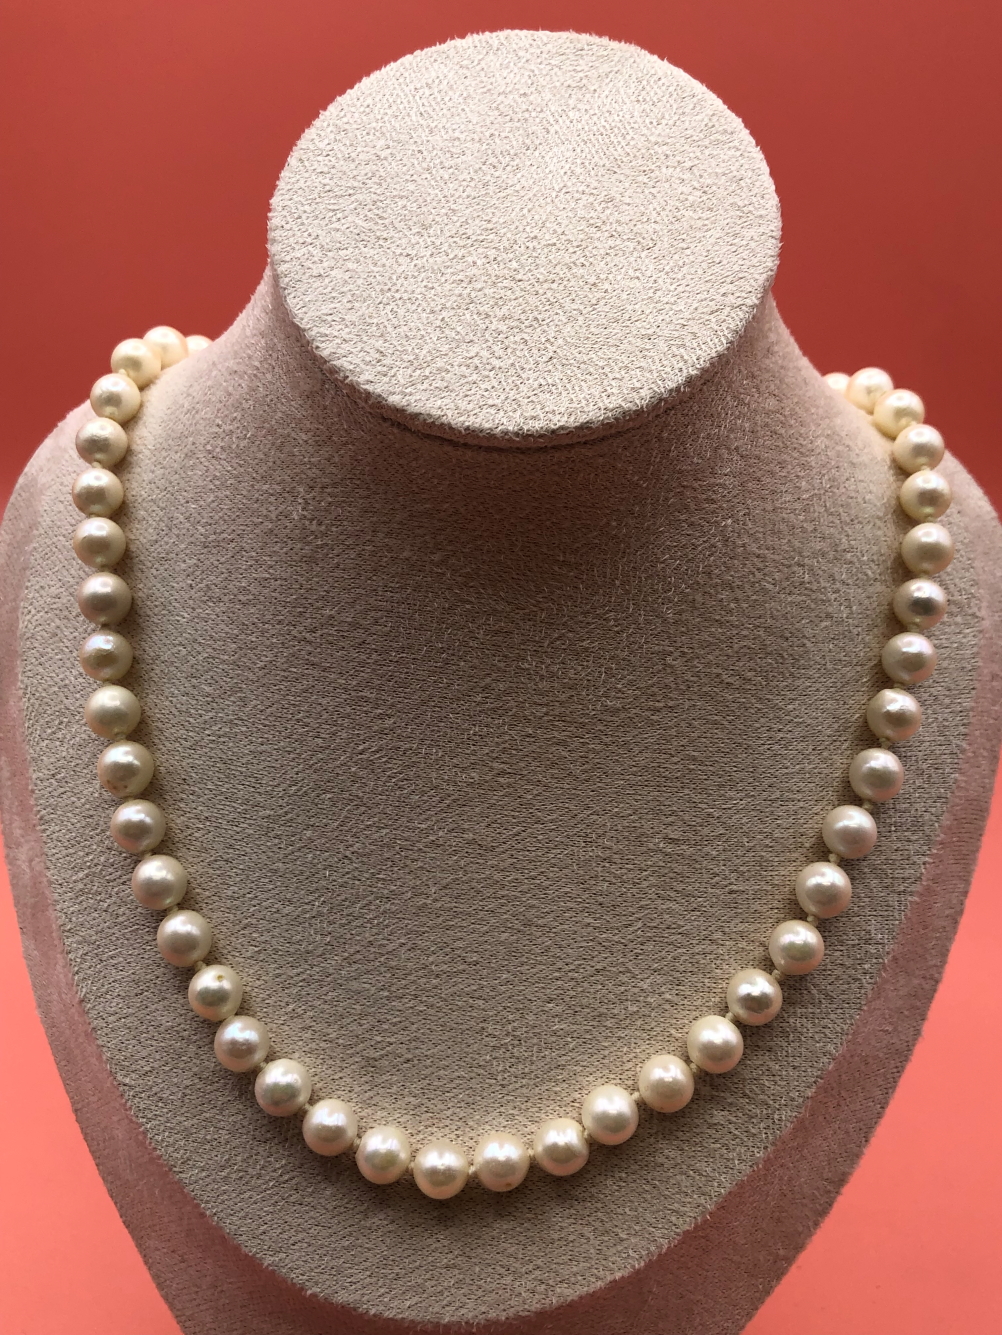 TWO STRINGS OF CULTURED PEARLS. A PINK 82cm ROPE WITH A 9ct HALLMARKED GOLD CLASP, AND A FURTHER - Image 5 of 6